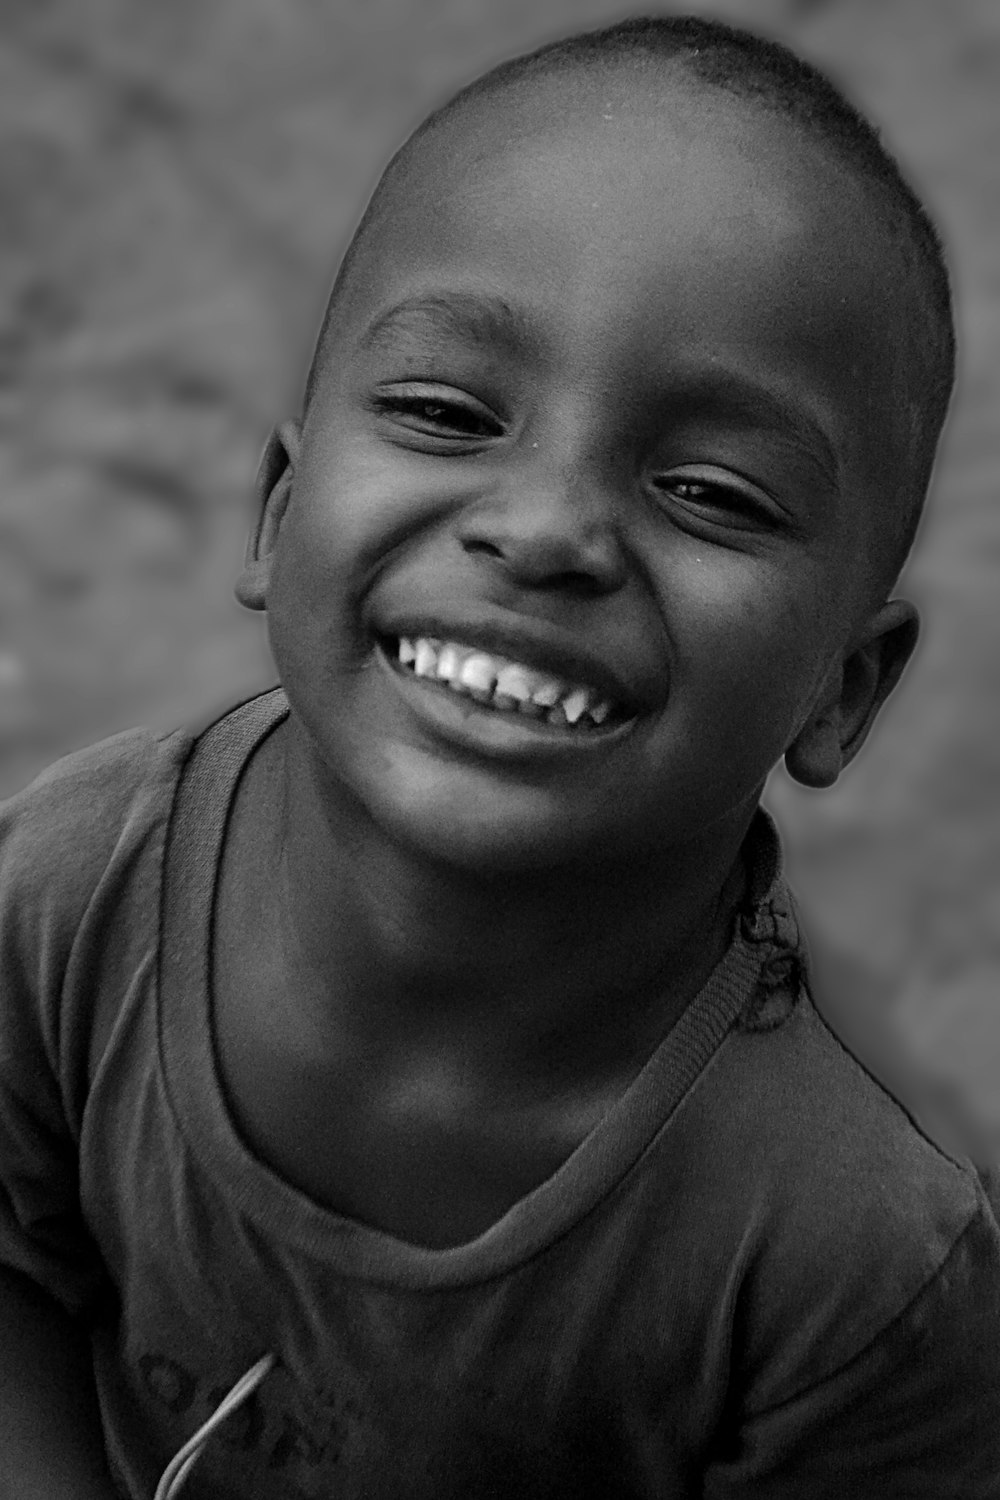 a close-up of a young boy smiling